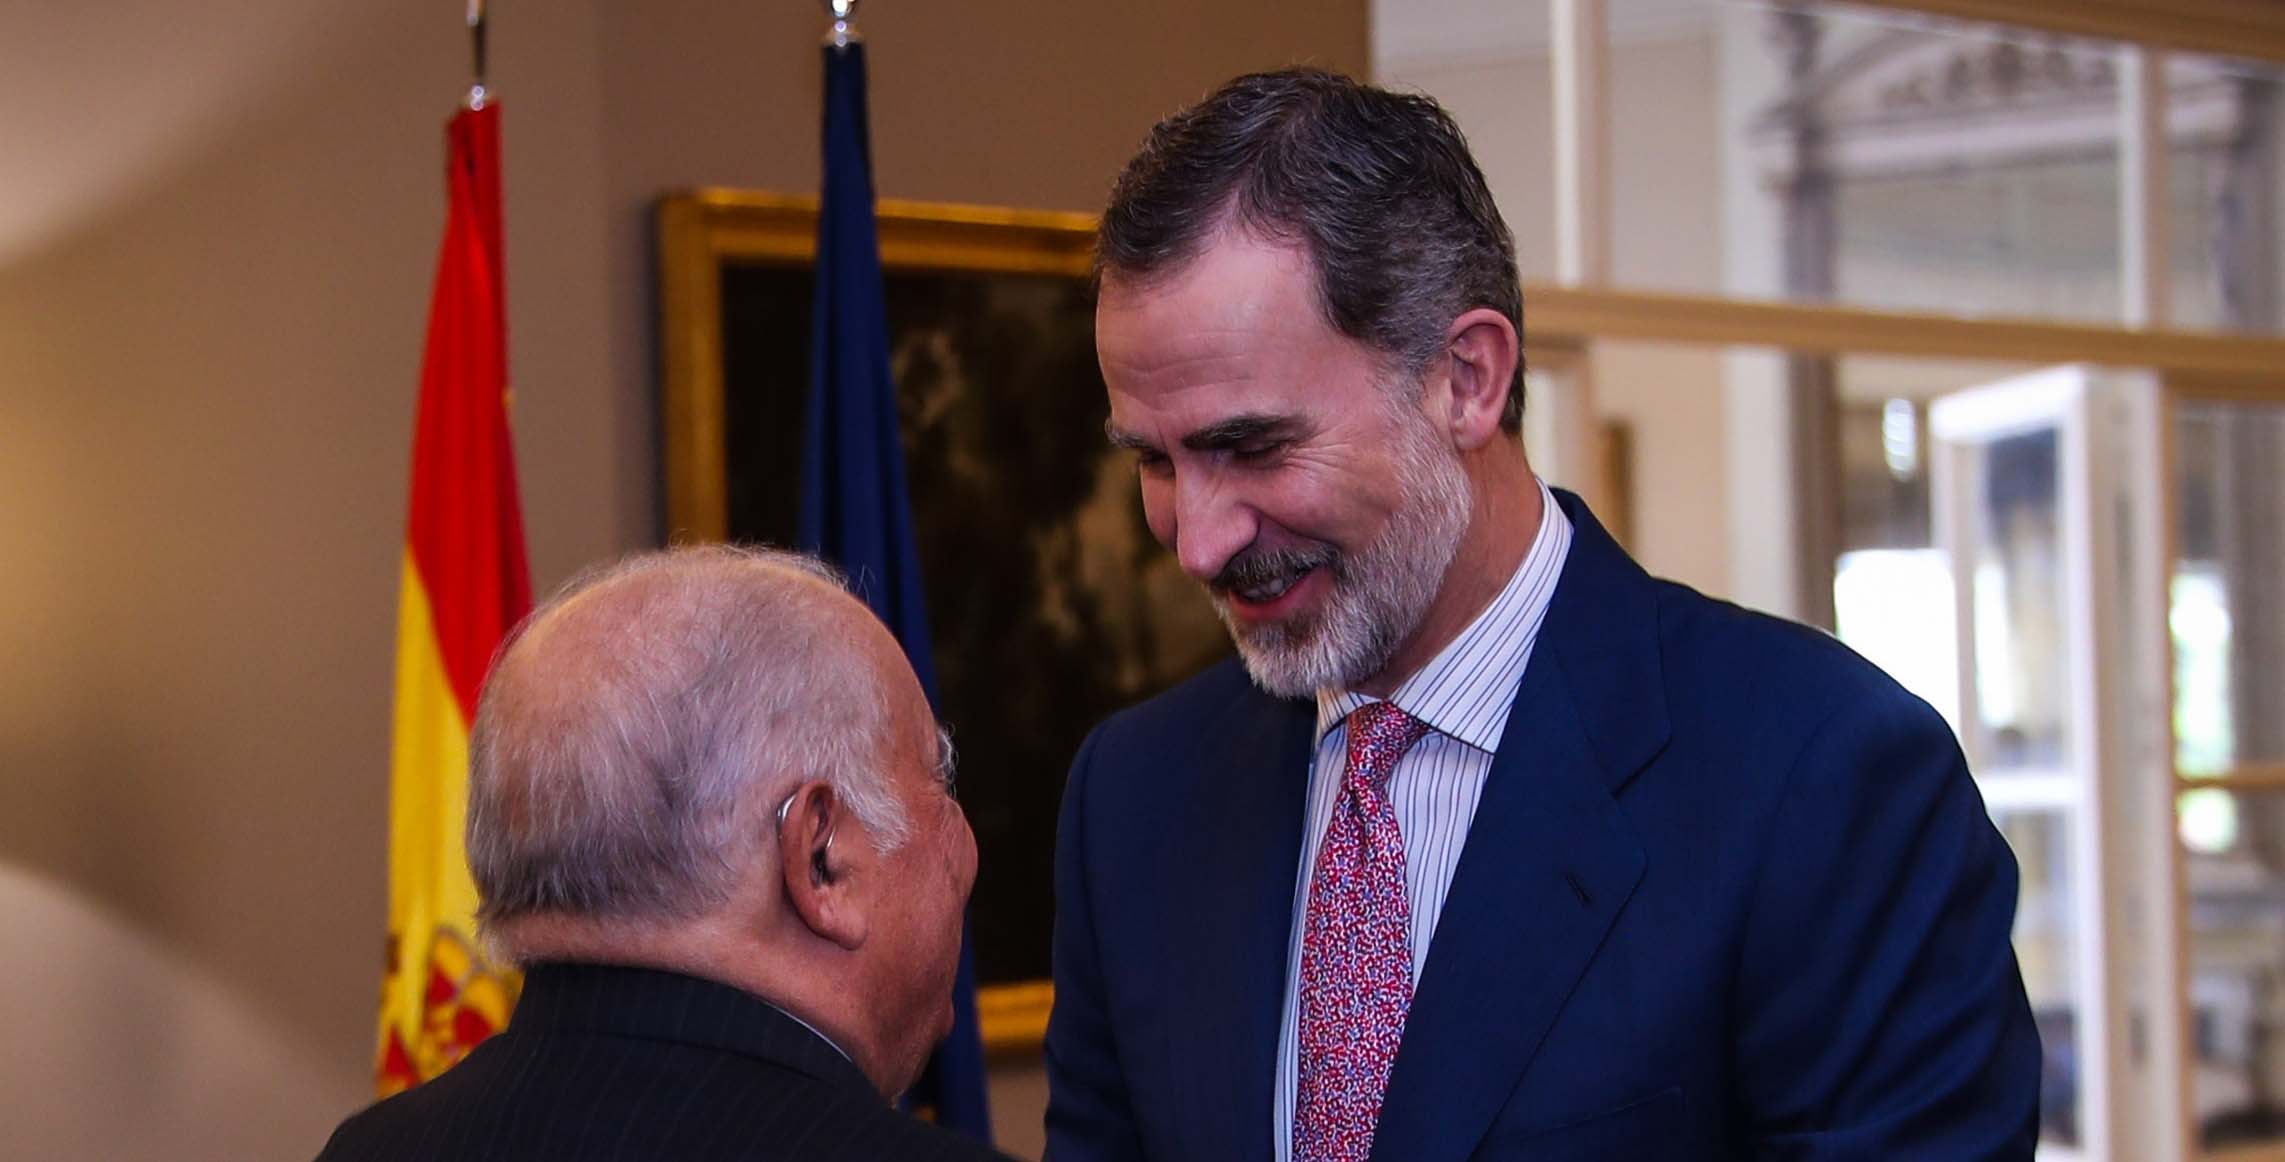 Felipe VI of Spain meets members of the Spanish community living in Uruguay, at the Spanish embassy in Montevideo, Uruguay, 29 February 2020. The king of Spain is paying an official visit for taking part at the investiture of President Luis Lacalle Pou. EFE/ Federico Anfitti
